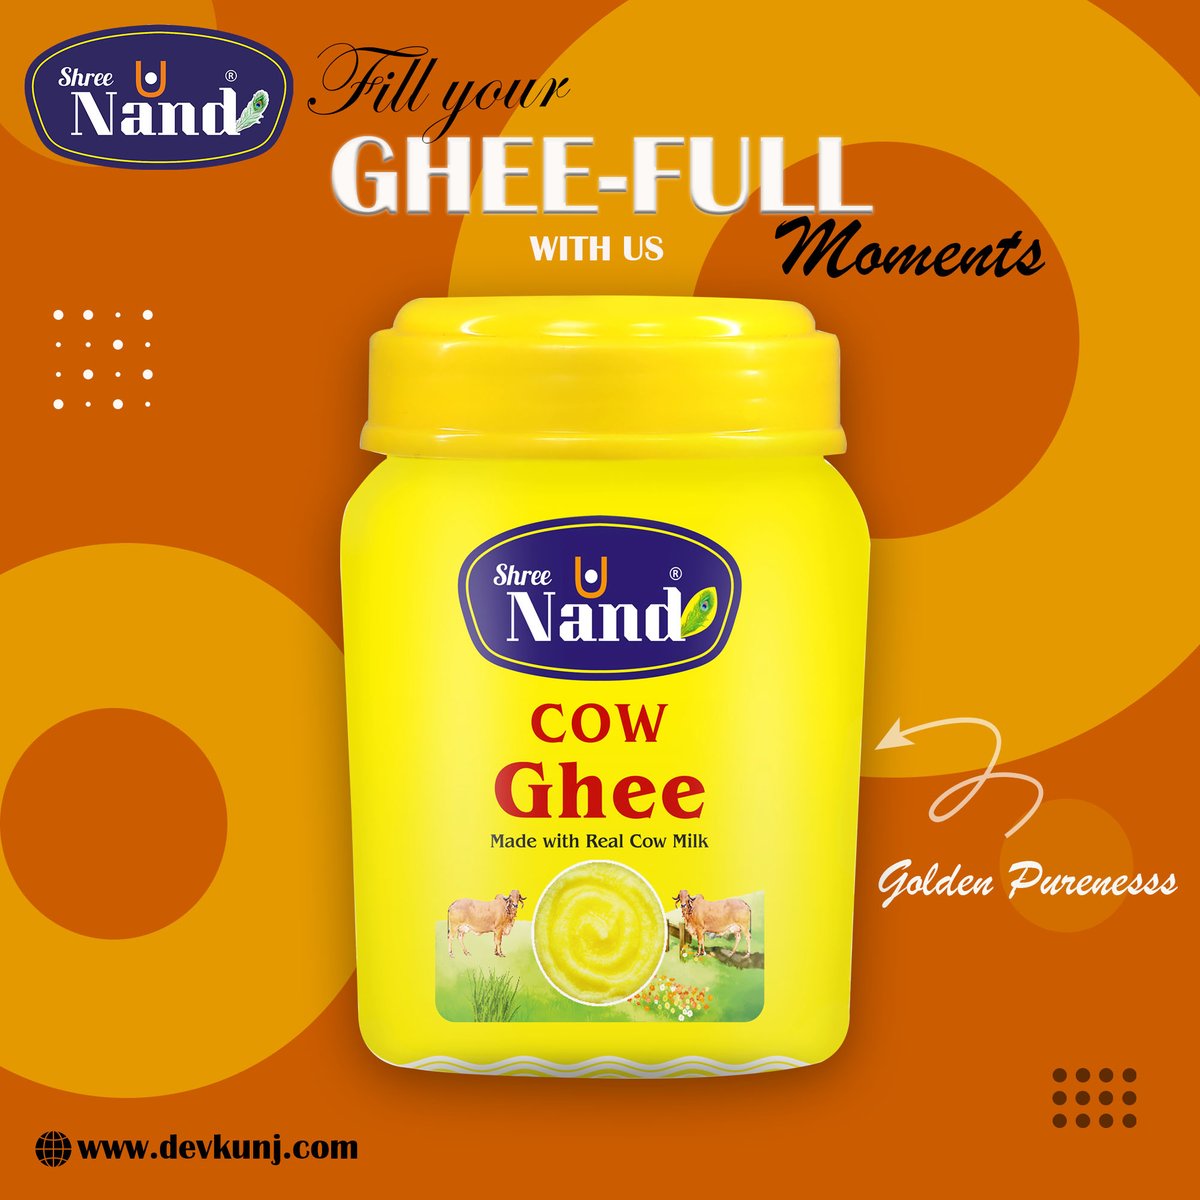 Experience the golden pureness of Shree Nand Cow Ghee! 🐄✨ Made from real cow milk, our ghee brings you the richness of tradition and the taste of purity. Perfect for your culinary and skincare needs. Fill your moments with goodness and health. 
#GheeFullMoments #ShreeNandGhee